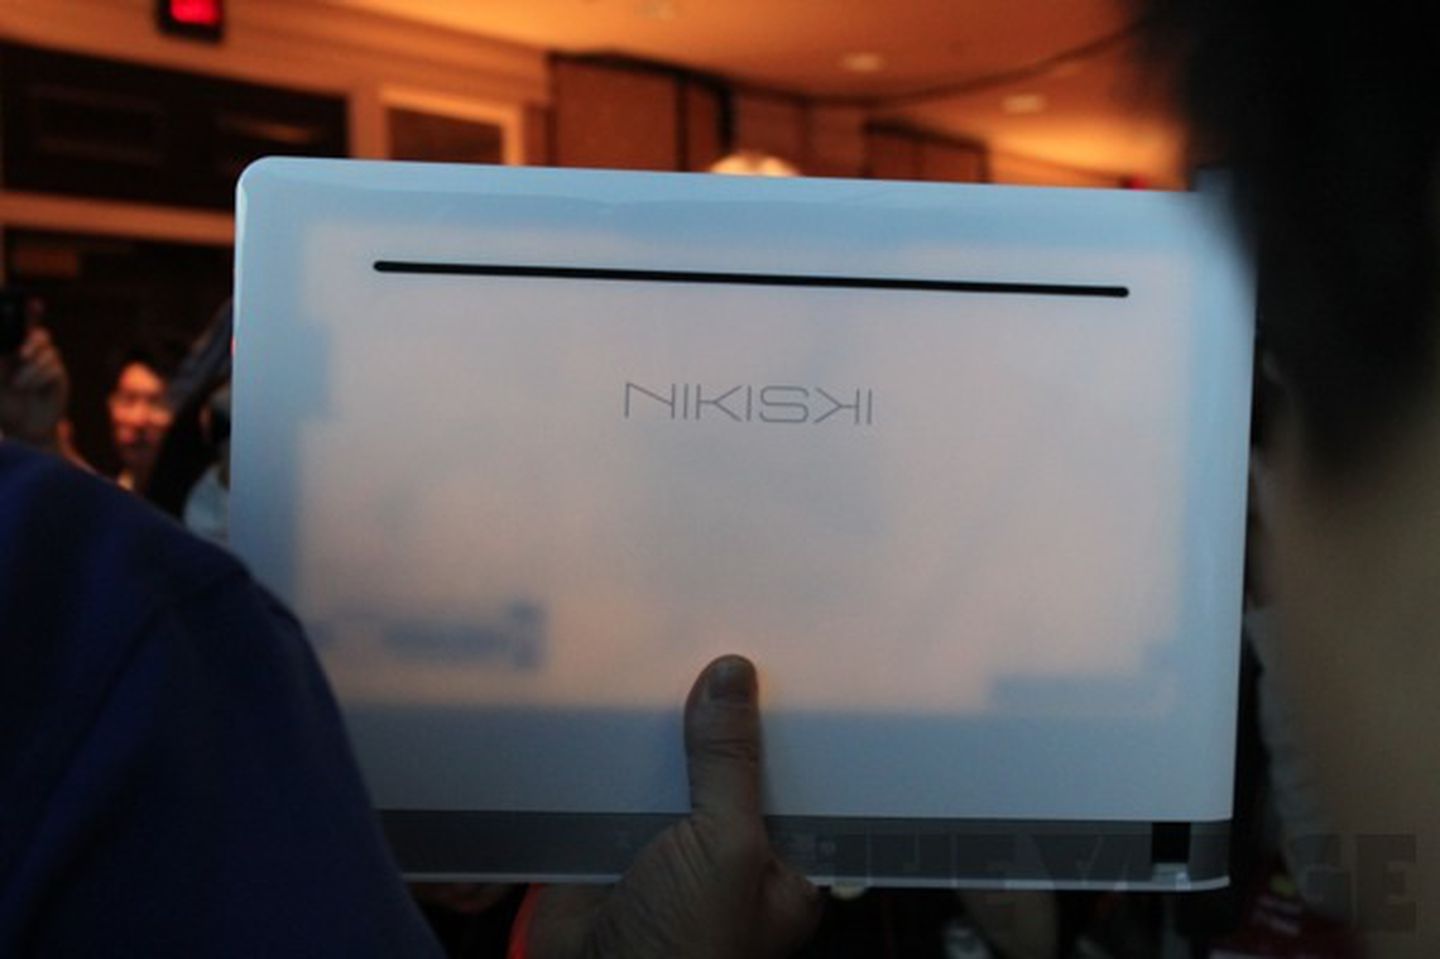 Intel Nikiski Laptop Prototype With See Through Touchpad Hands On Pictures And Video The Verge 6831